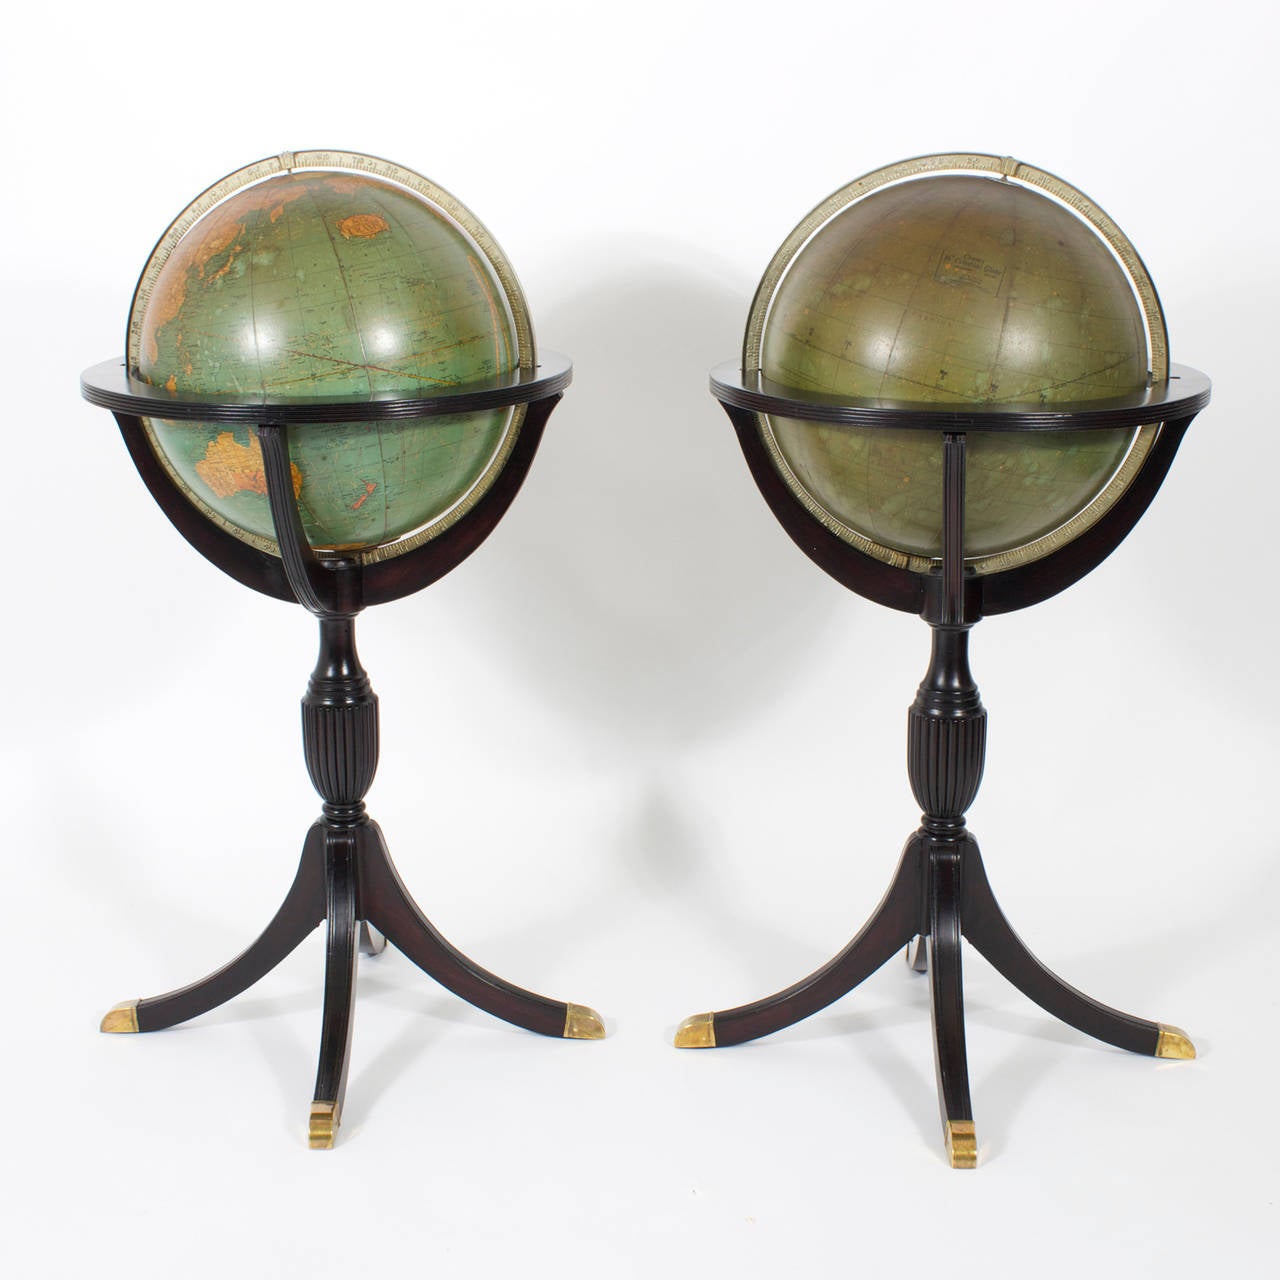 A rare pair of vintage scholastic globes one terrestrial and one celestial, mounted in ebonized Hepplewhite style mahogany stands with brass feet. The glass globes with decoupage are labelled Cram. Minor repair to one globe. Perfect for a library or